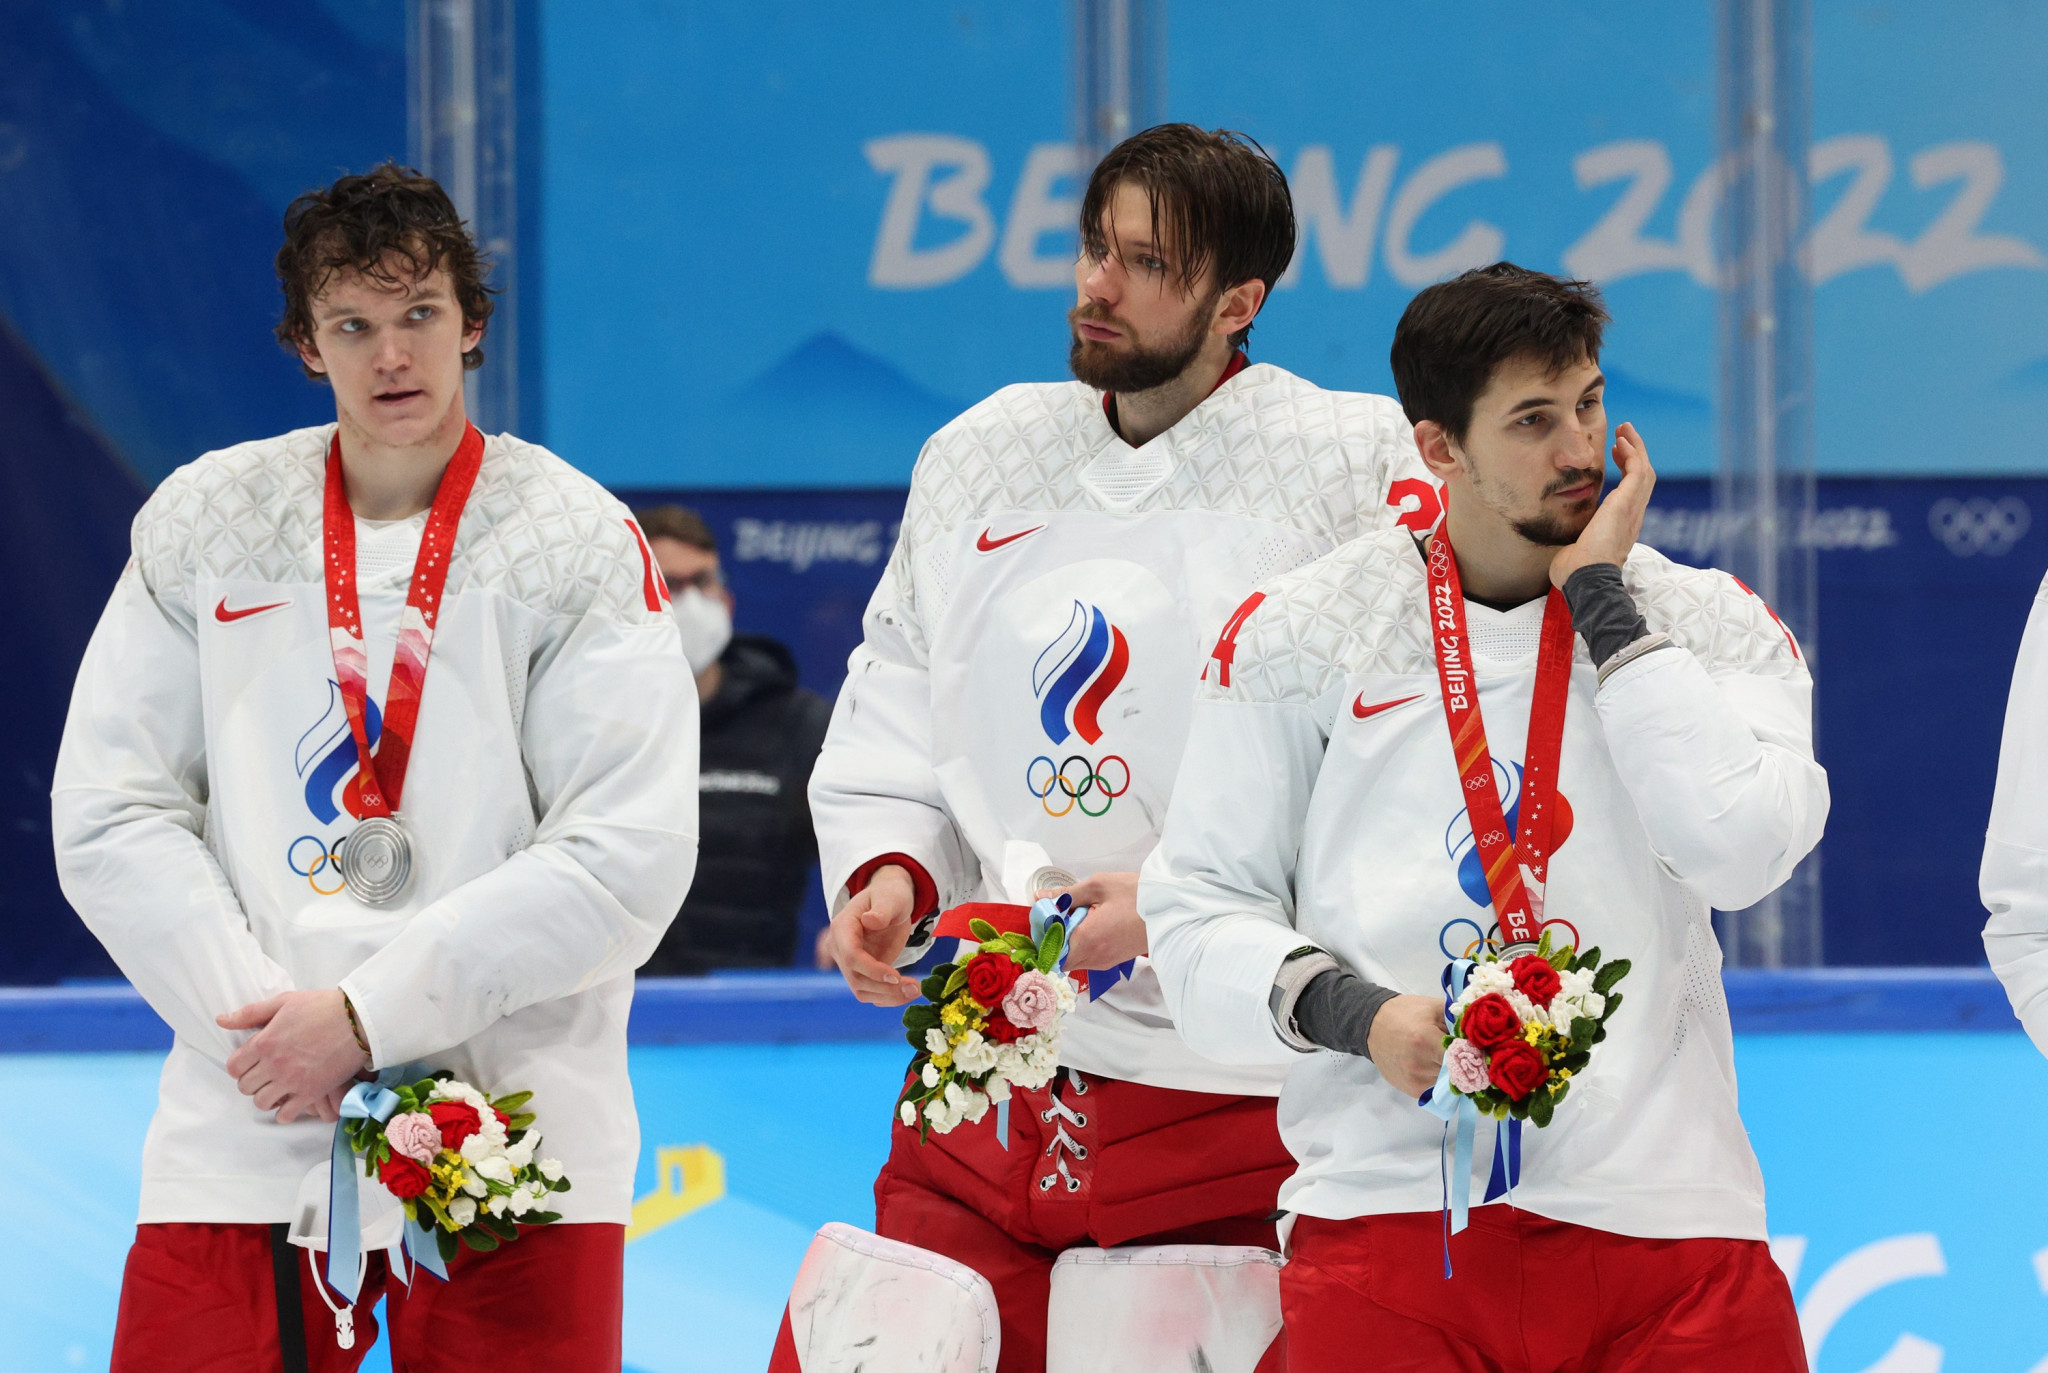  Ivan Fedotov, centre, was part of the Russian Olympic Committee team that lost to Finland in the gold-medal match at Beijing 2022 ©Getty Images